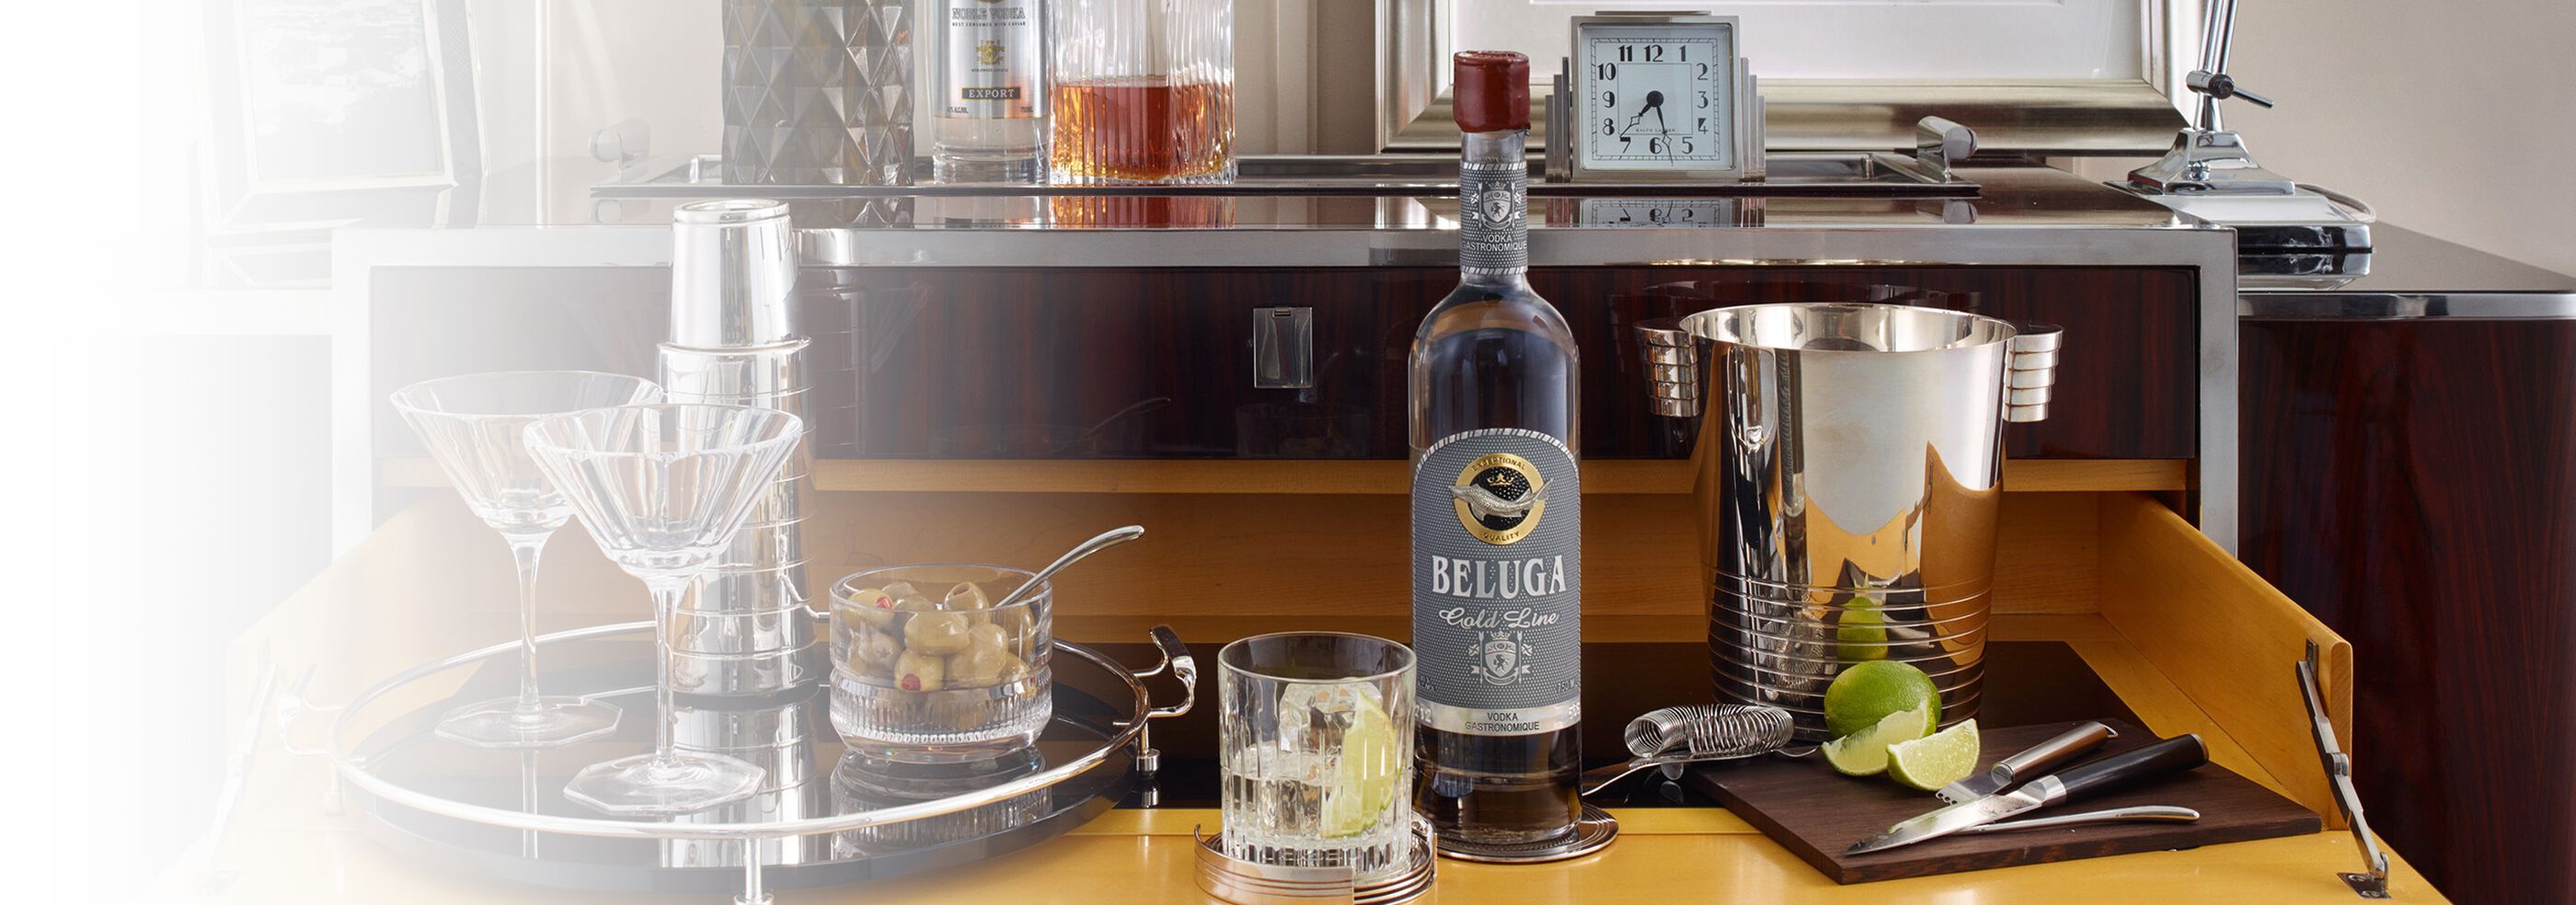  Bottle of Beluga Gold Line Vodka with cocktail tools and martini glasses